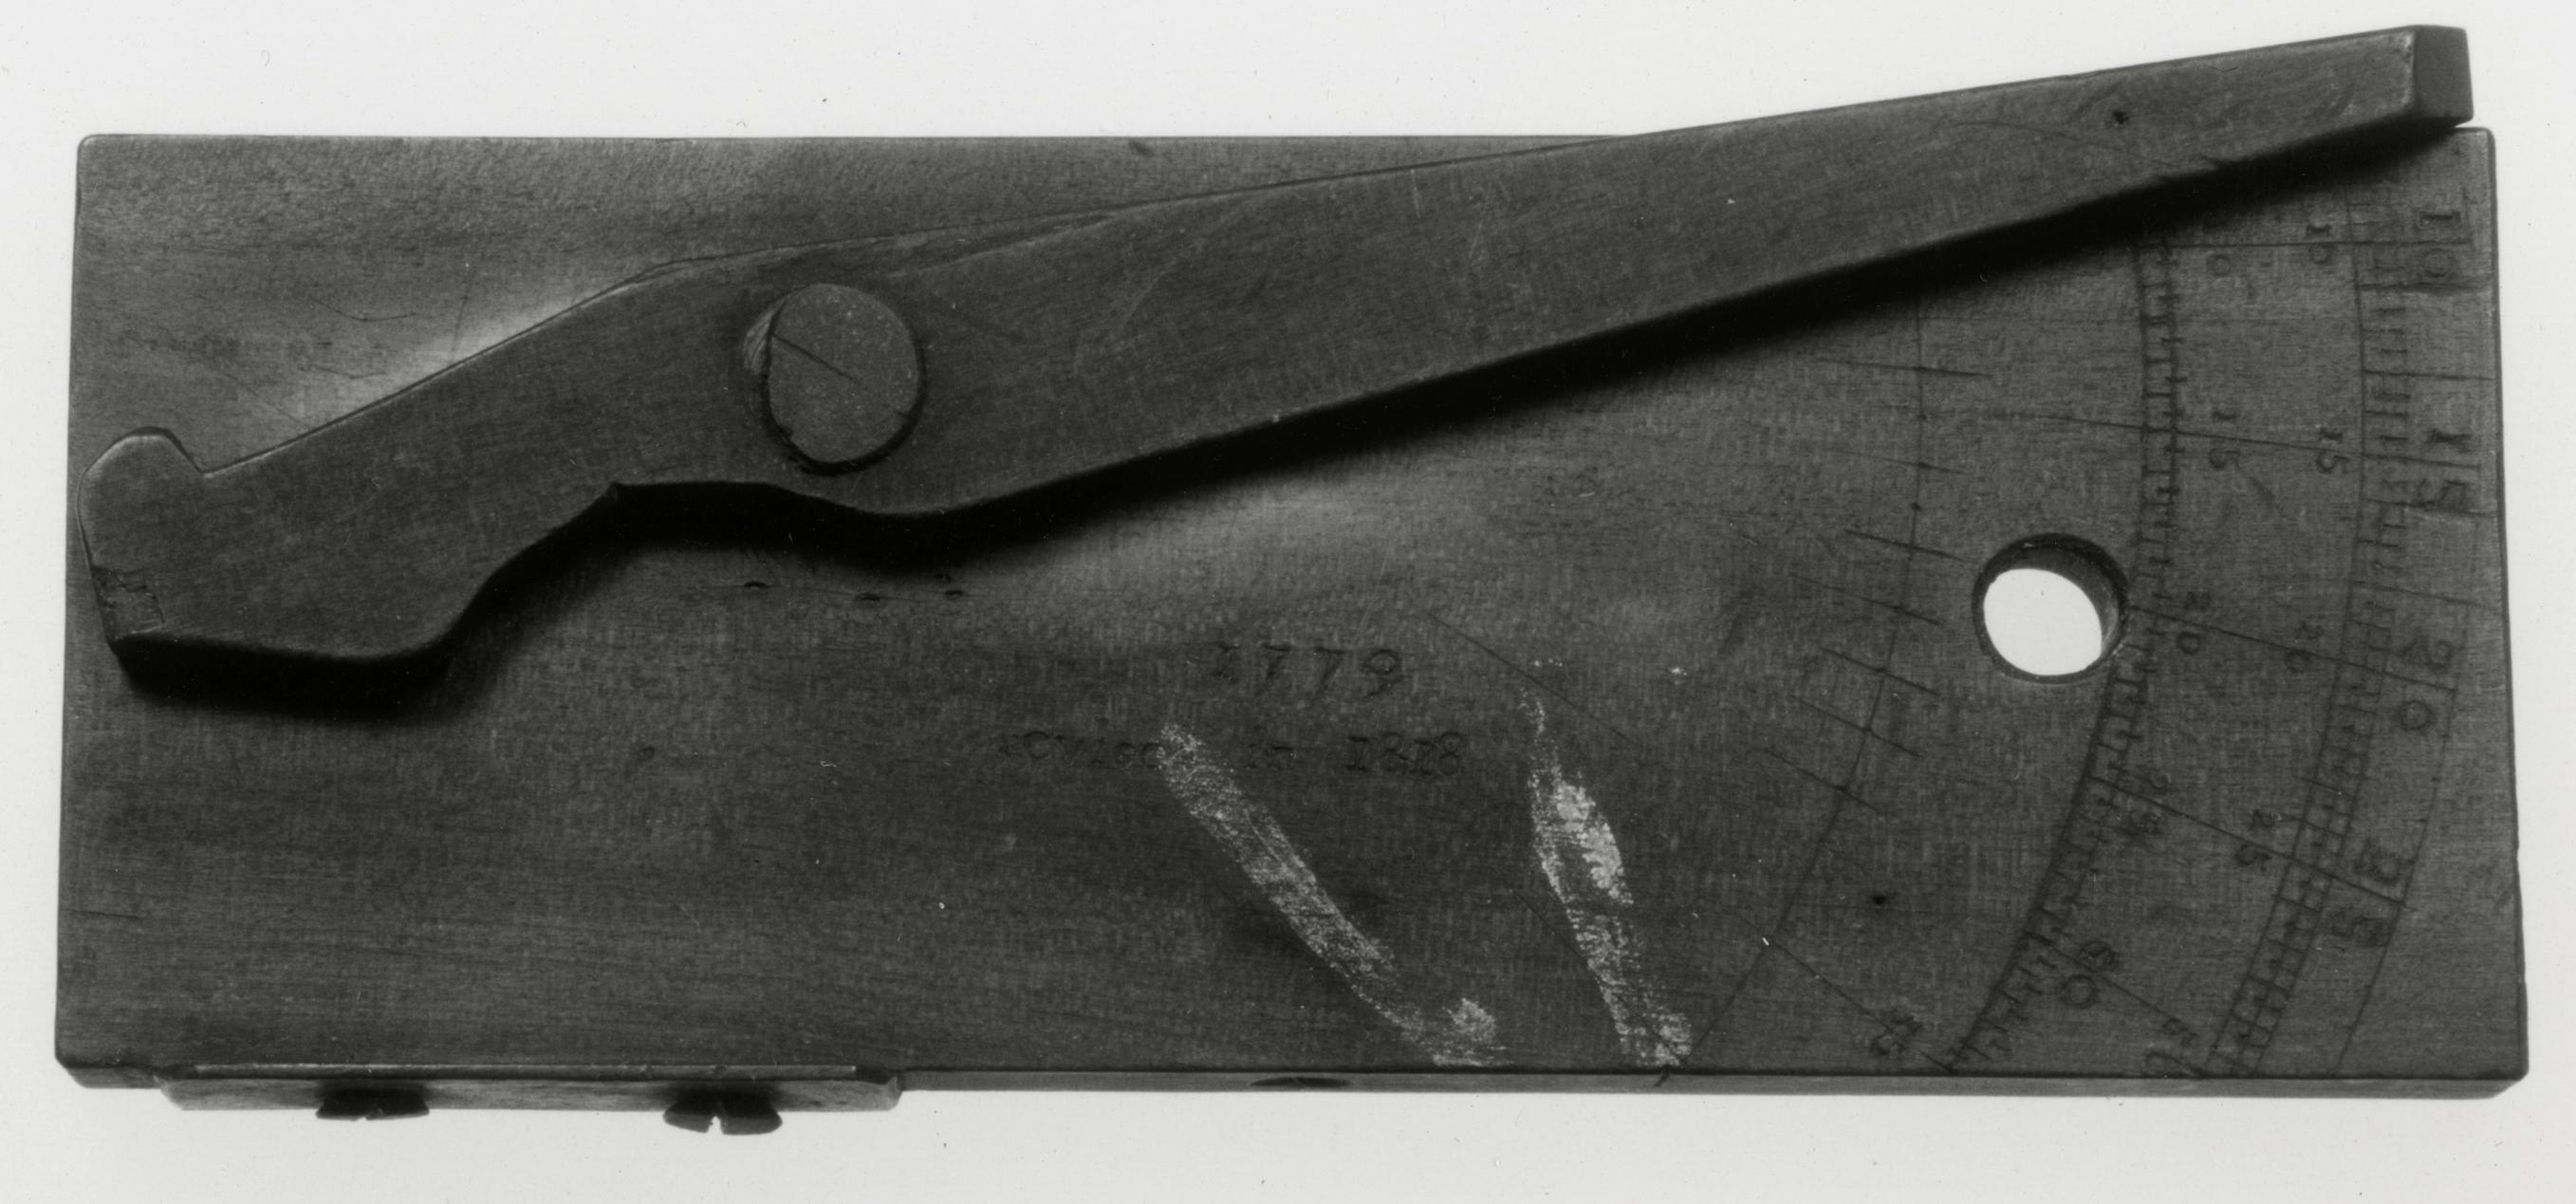 Black and white photograph of a dial-marking tool (gunsmith's tool).